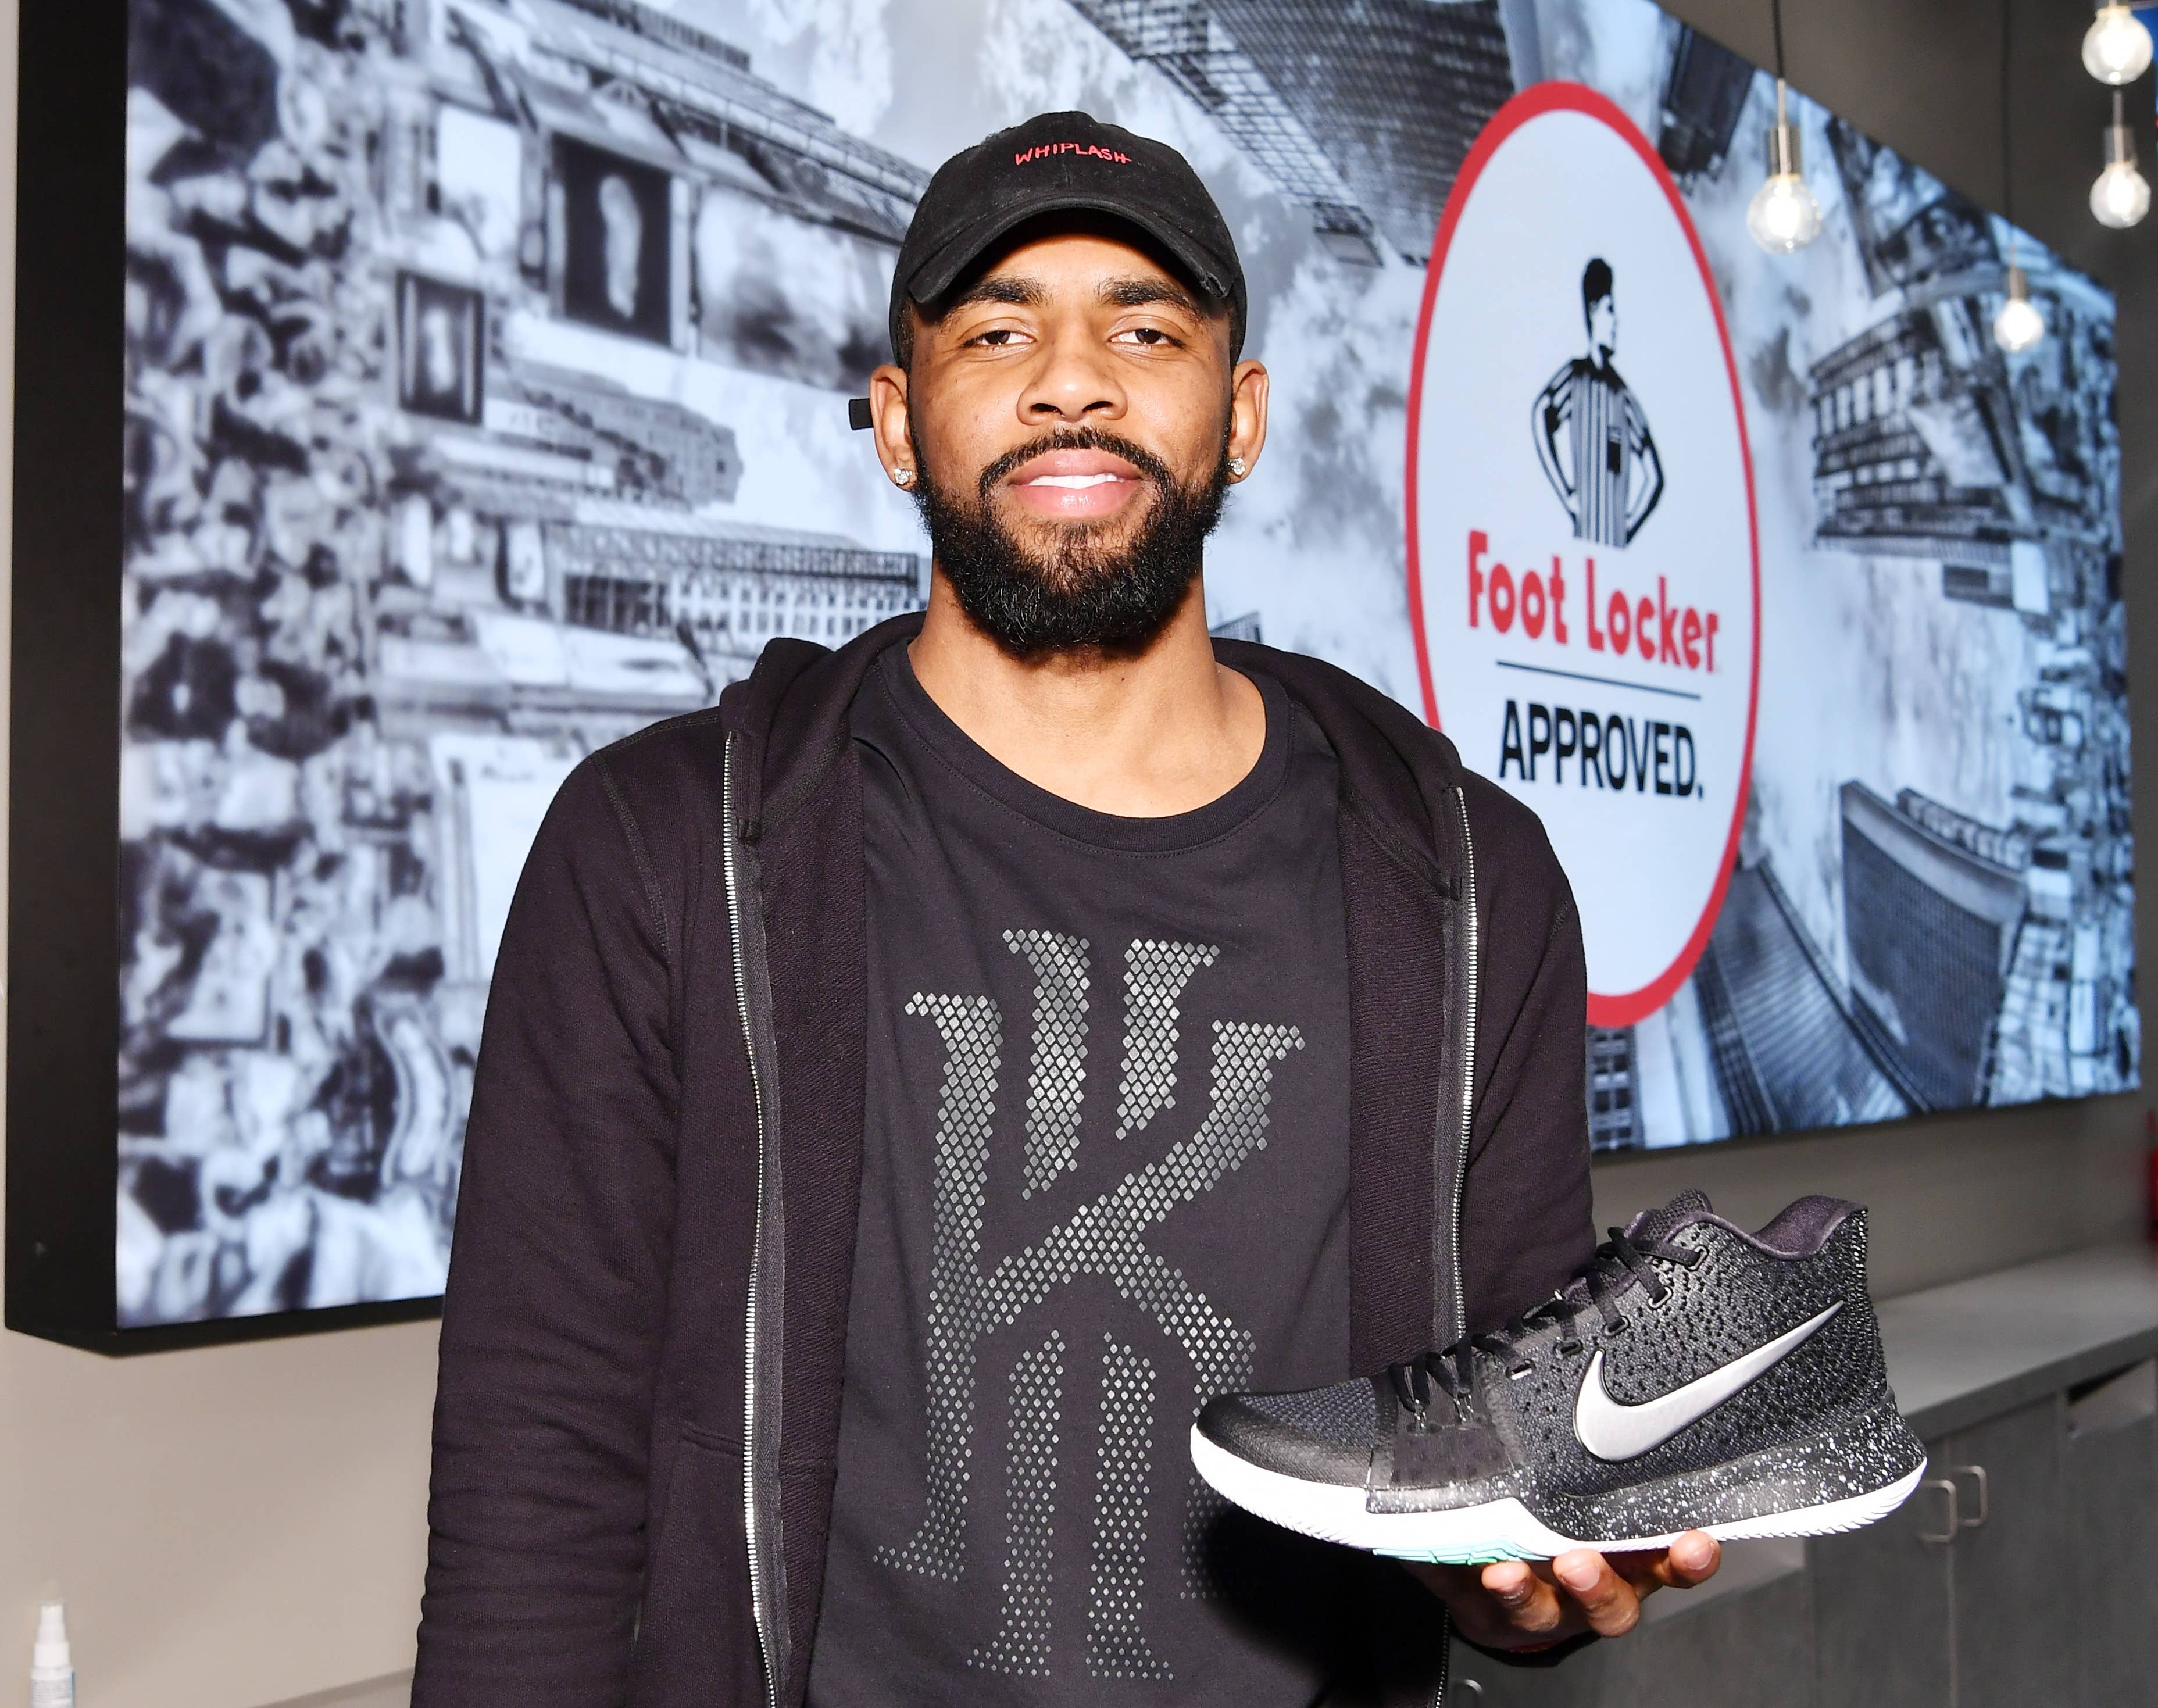 How Kyrie Irving Nike Not Making Signature All-Star Sneakers This Year | Complex